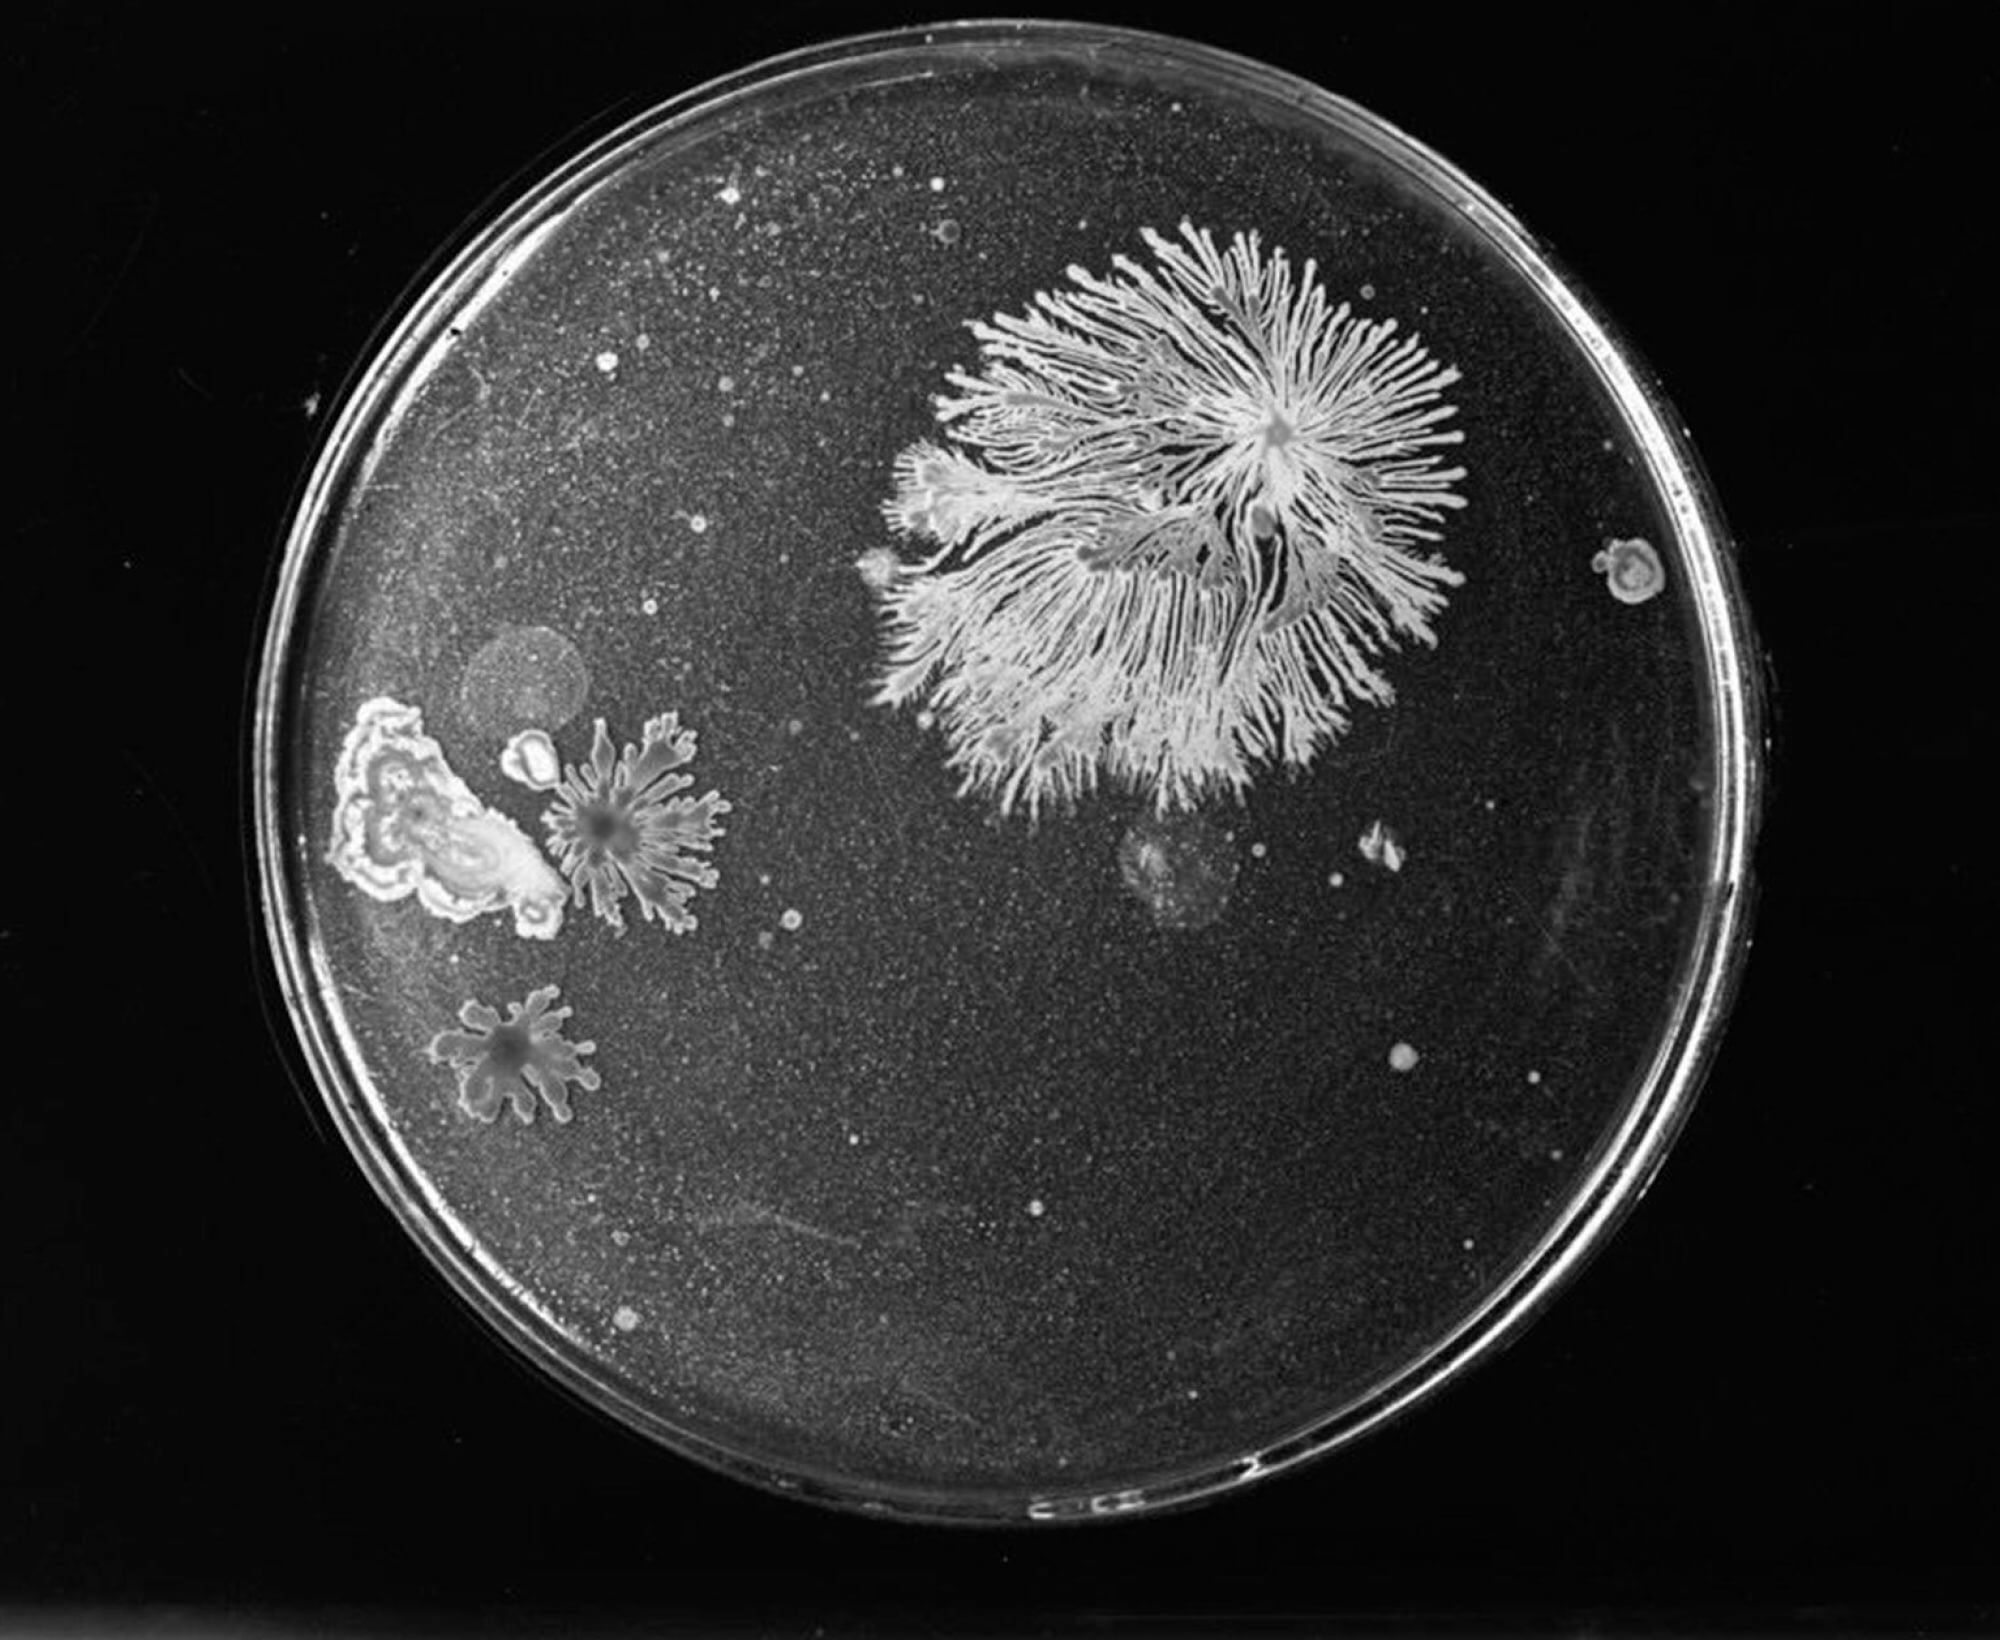 Black and white image showing a petri dish with bacteria growing on the medium.